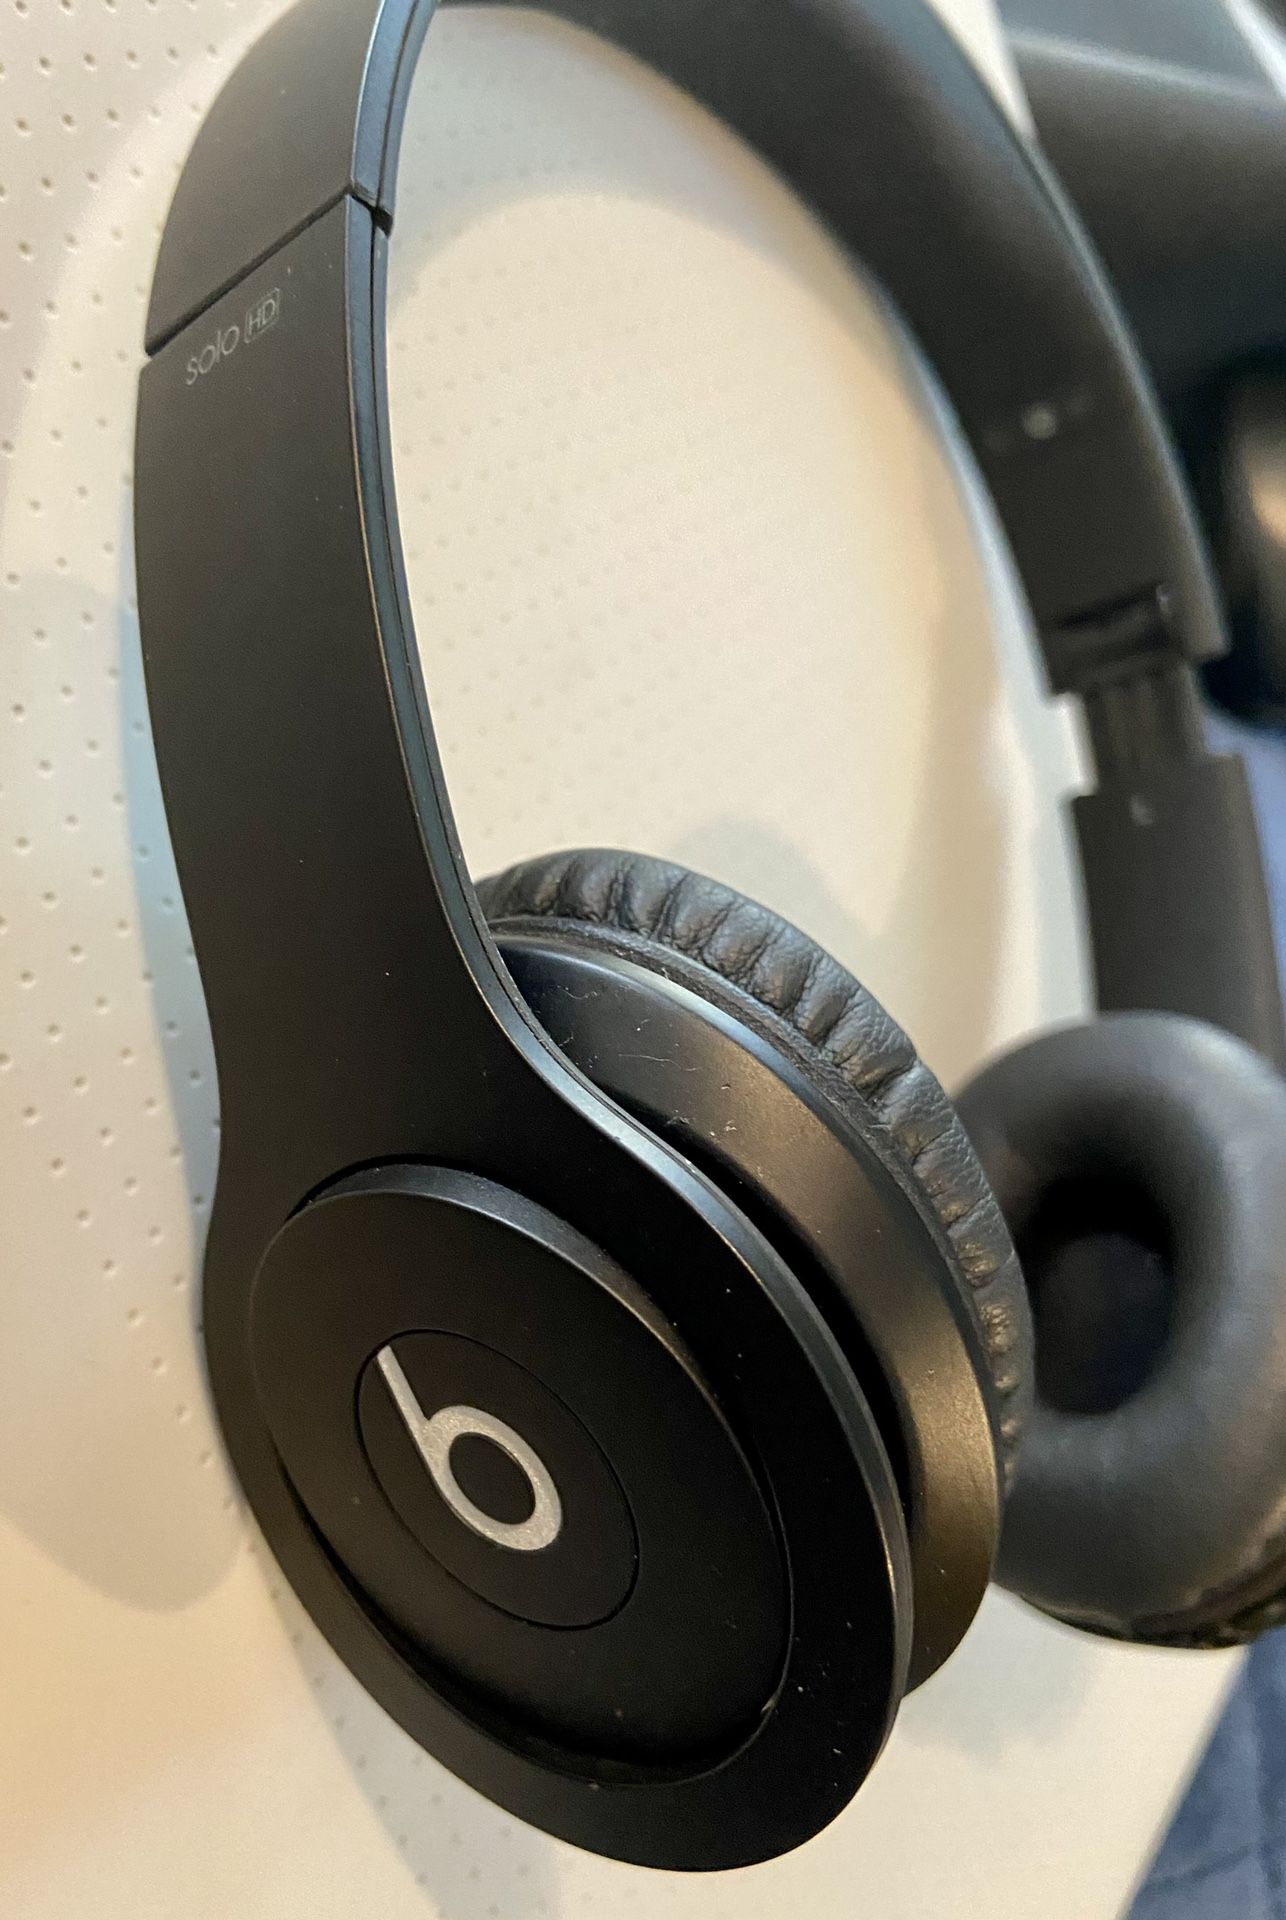 Bose Foldable Headphones with AUX Cord